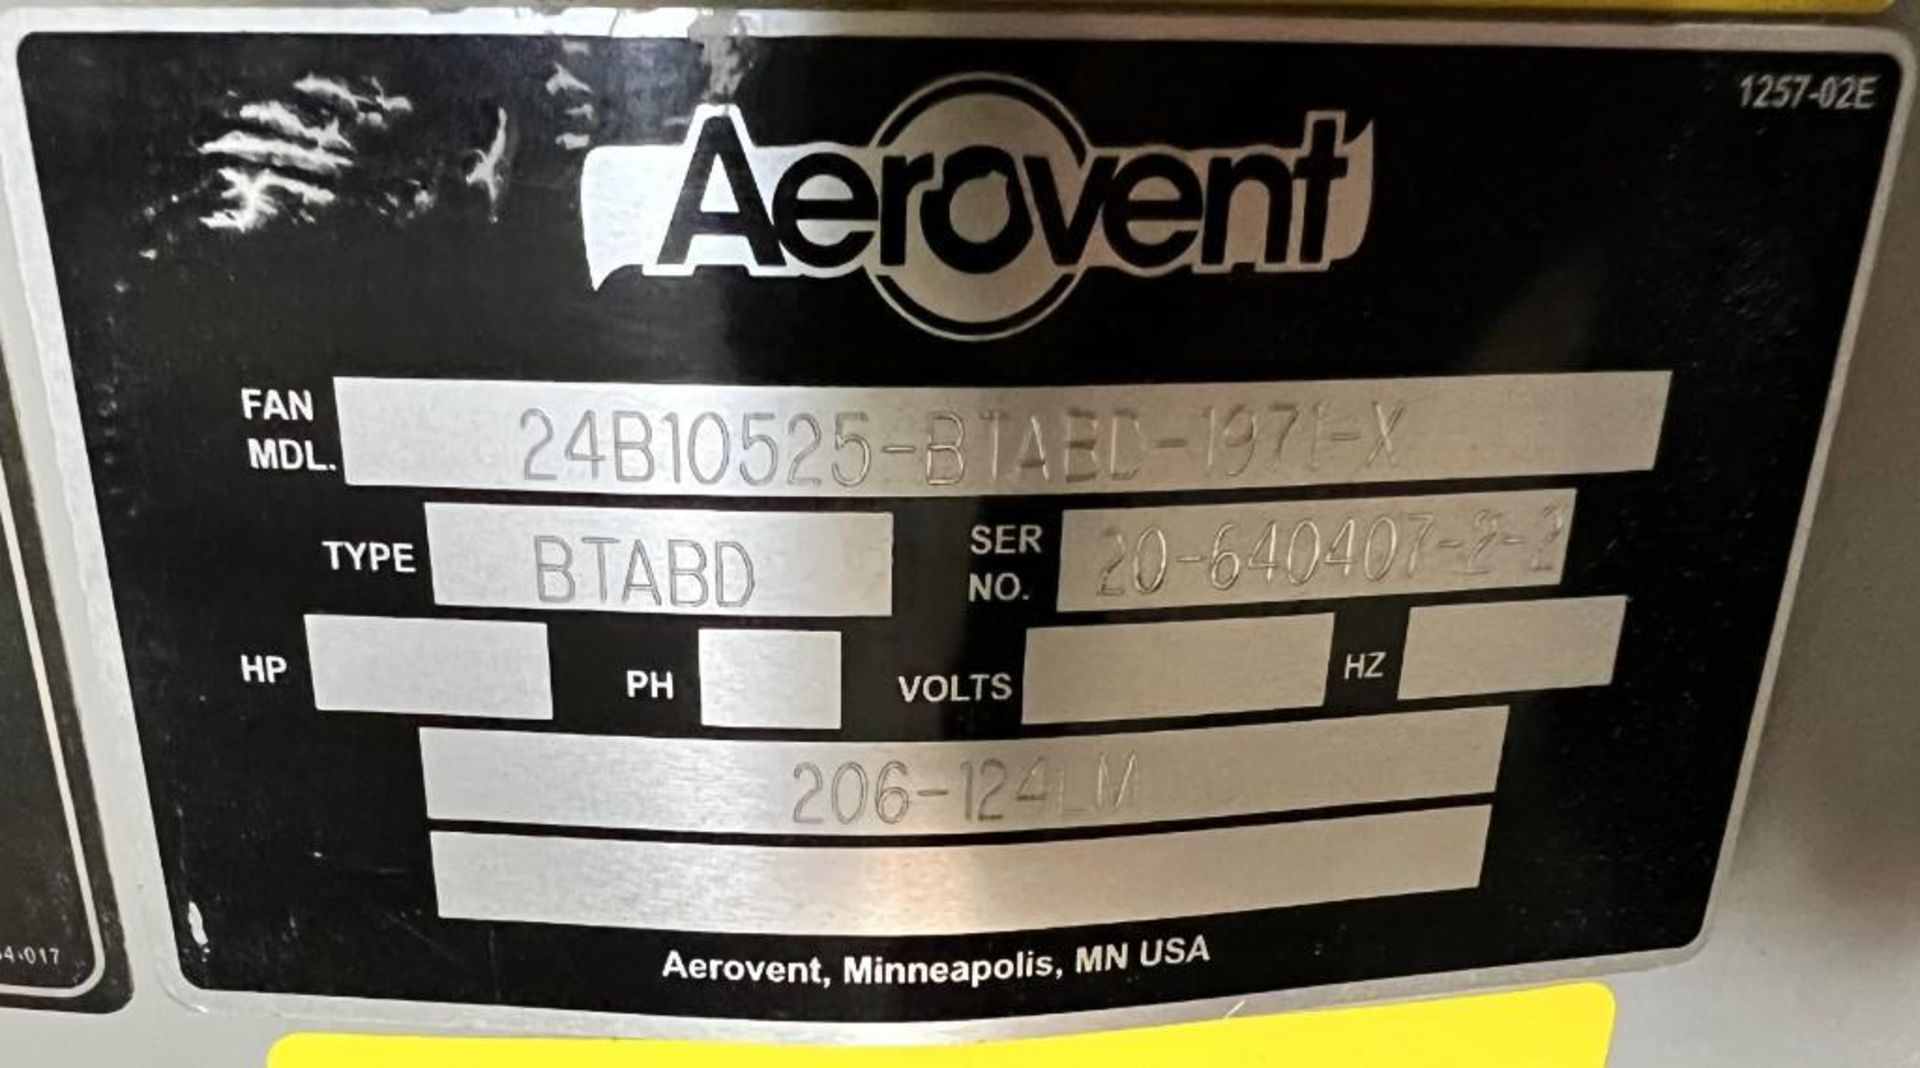 Lot Of (4) Aerovent Fans. With (2) model 24B10525-BTABD-1971-X, Serial# 20-640407-2-2 & 20-640407-2- - Image 5 of 12